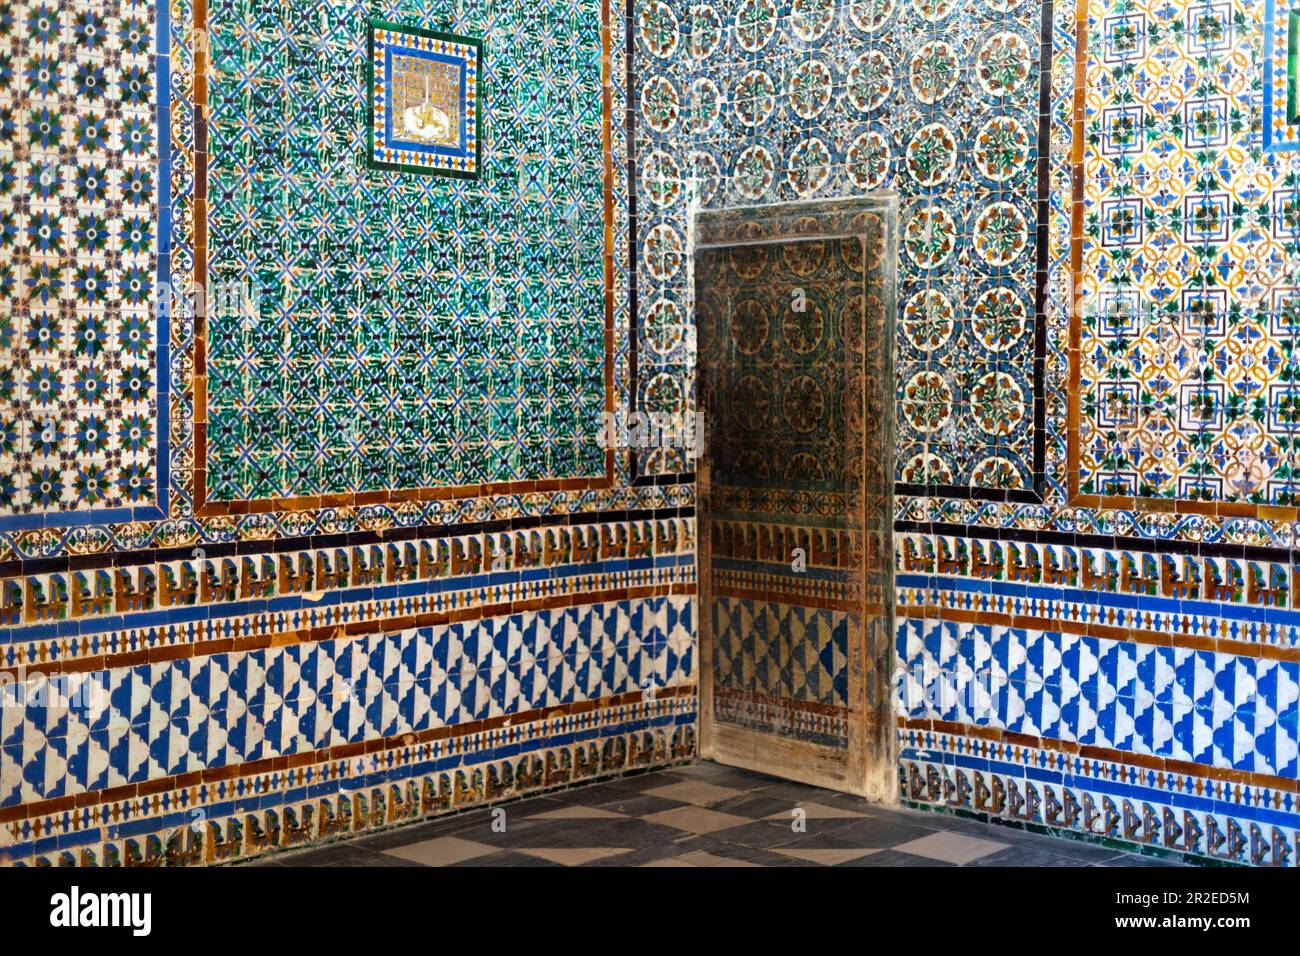 Spain, Andalusia, Seville, La Casa de Pilatos (Pilate's House), azulejo tile work, palace in Seville which serves as the permanent residency of the Du Stock Photo